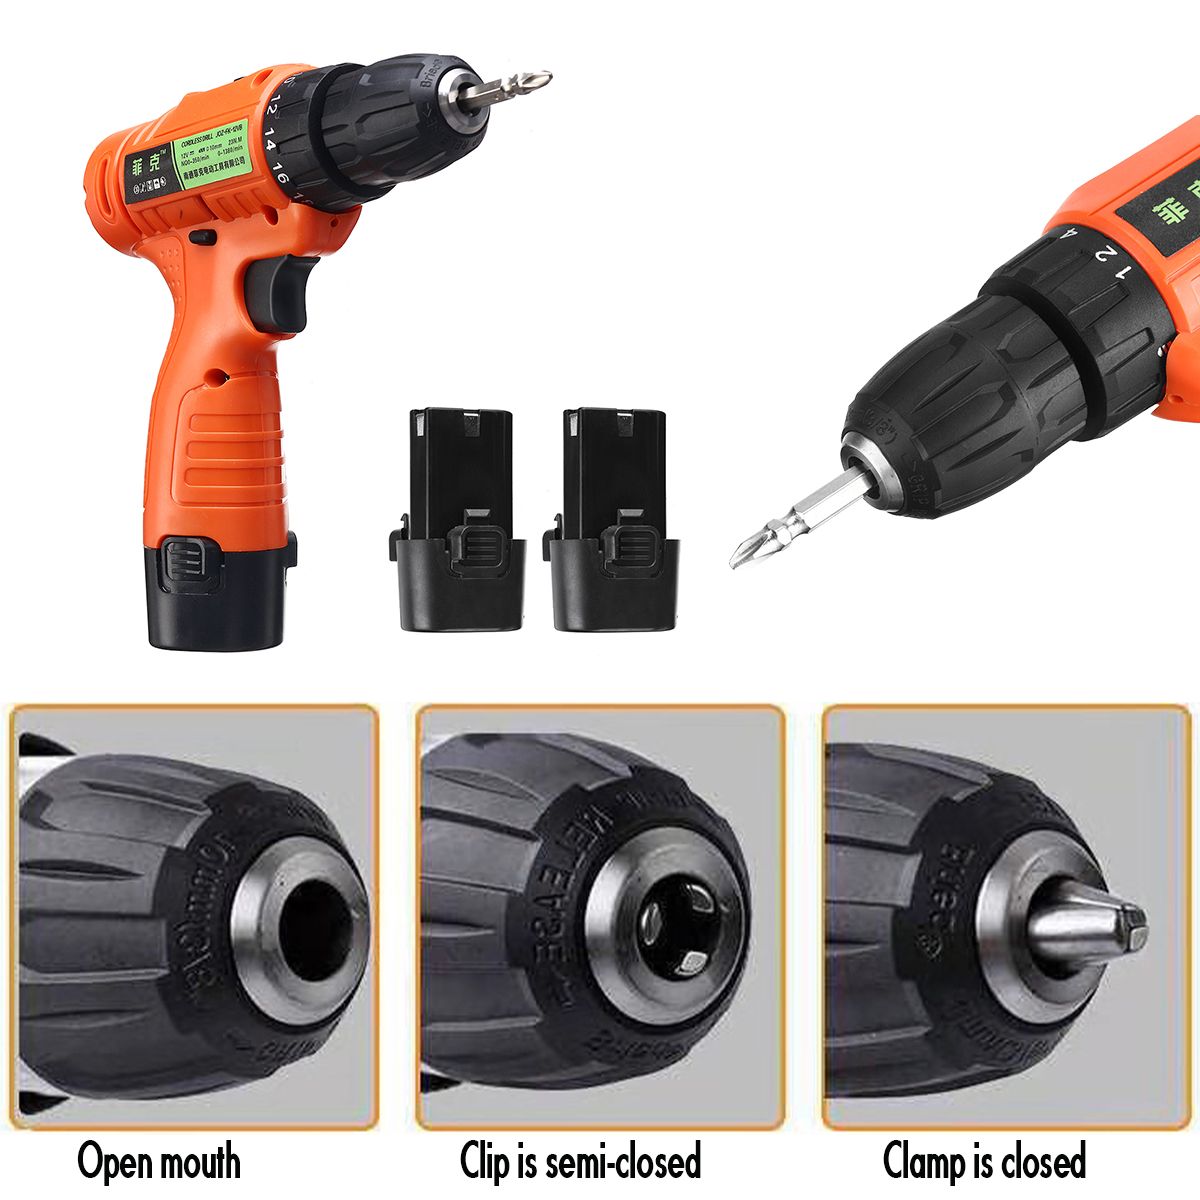 12V-Dual-Speed-Rechargable-Electric-Drill-Driver-Mini-Multifunction-Household-Li-ion-Battery-Power-S-1659811